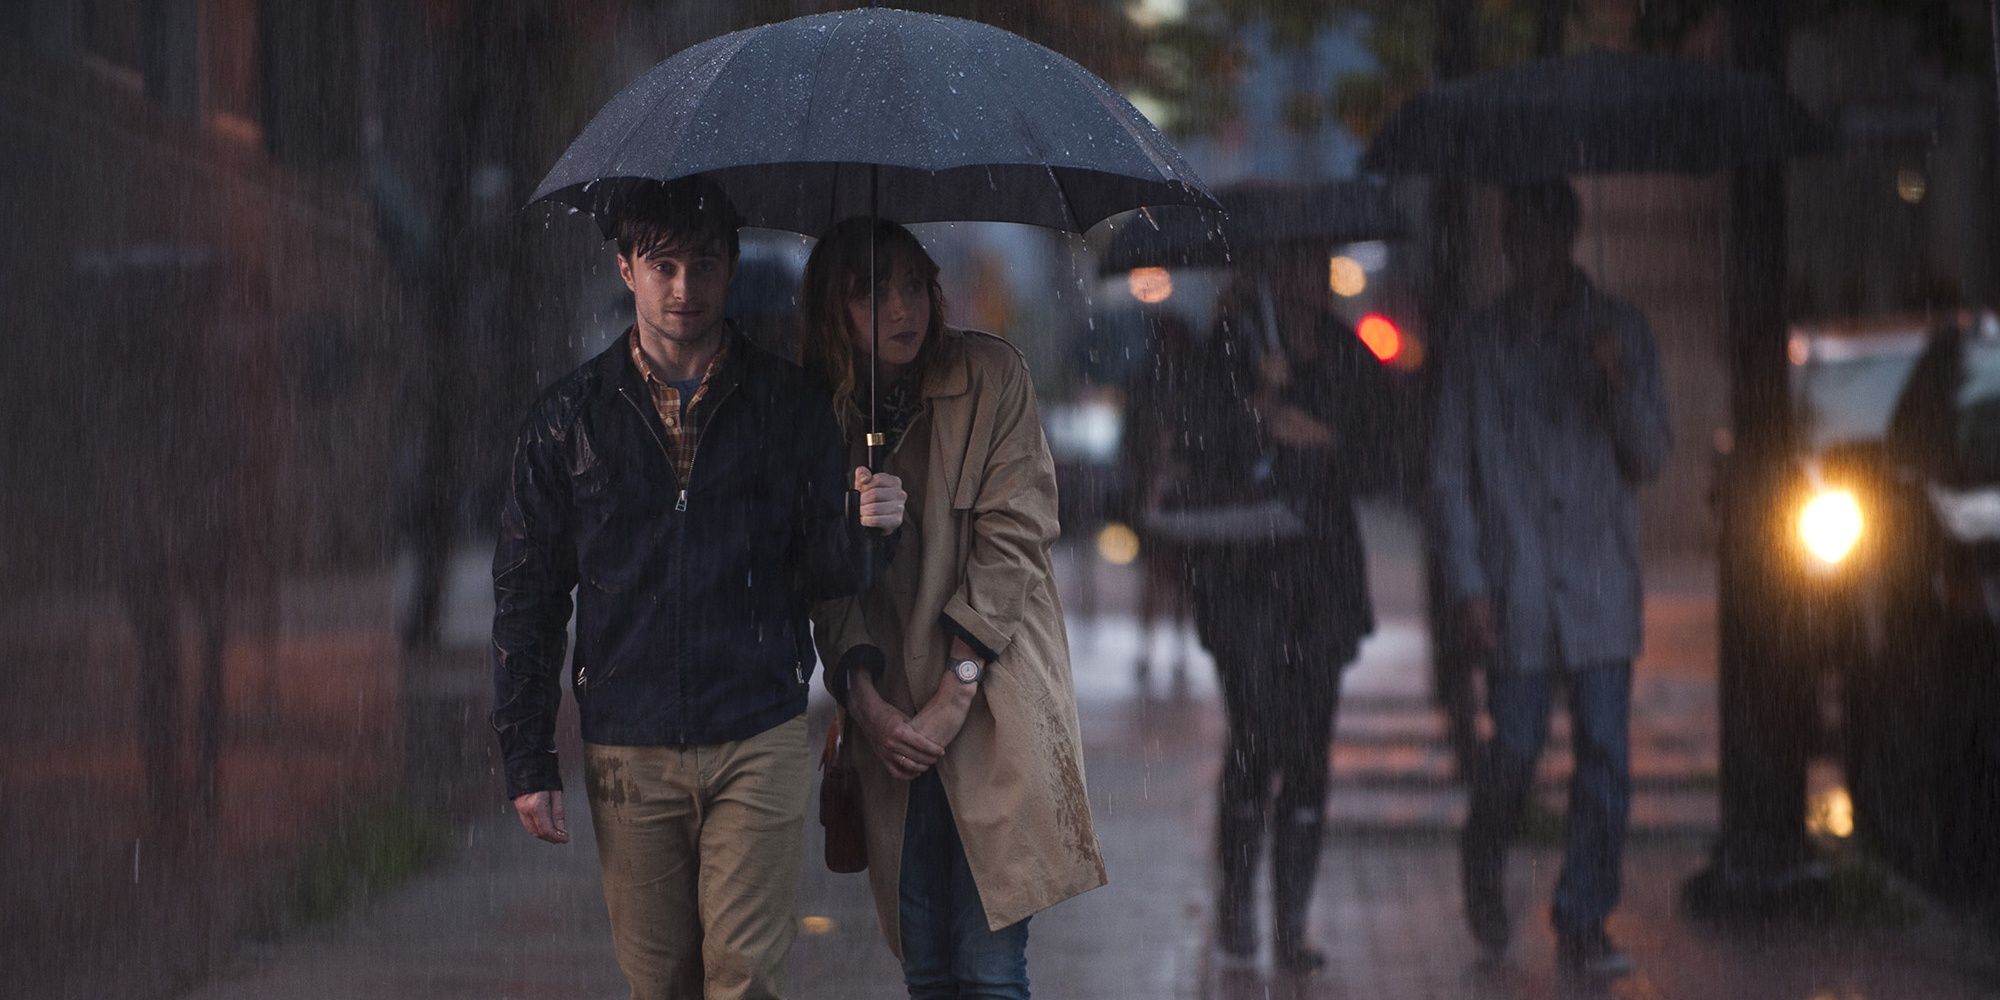 Daniel Radcliffe and Zoe Kazan in What If